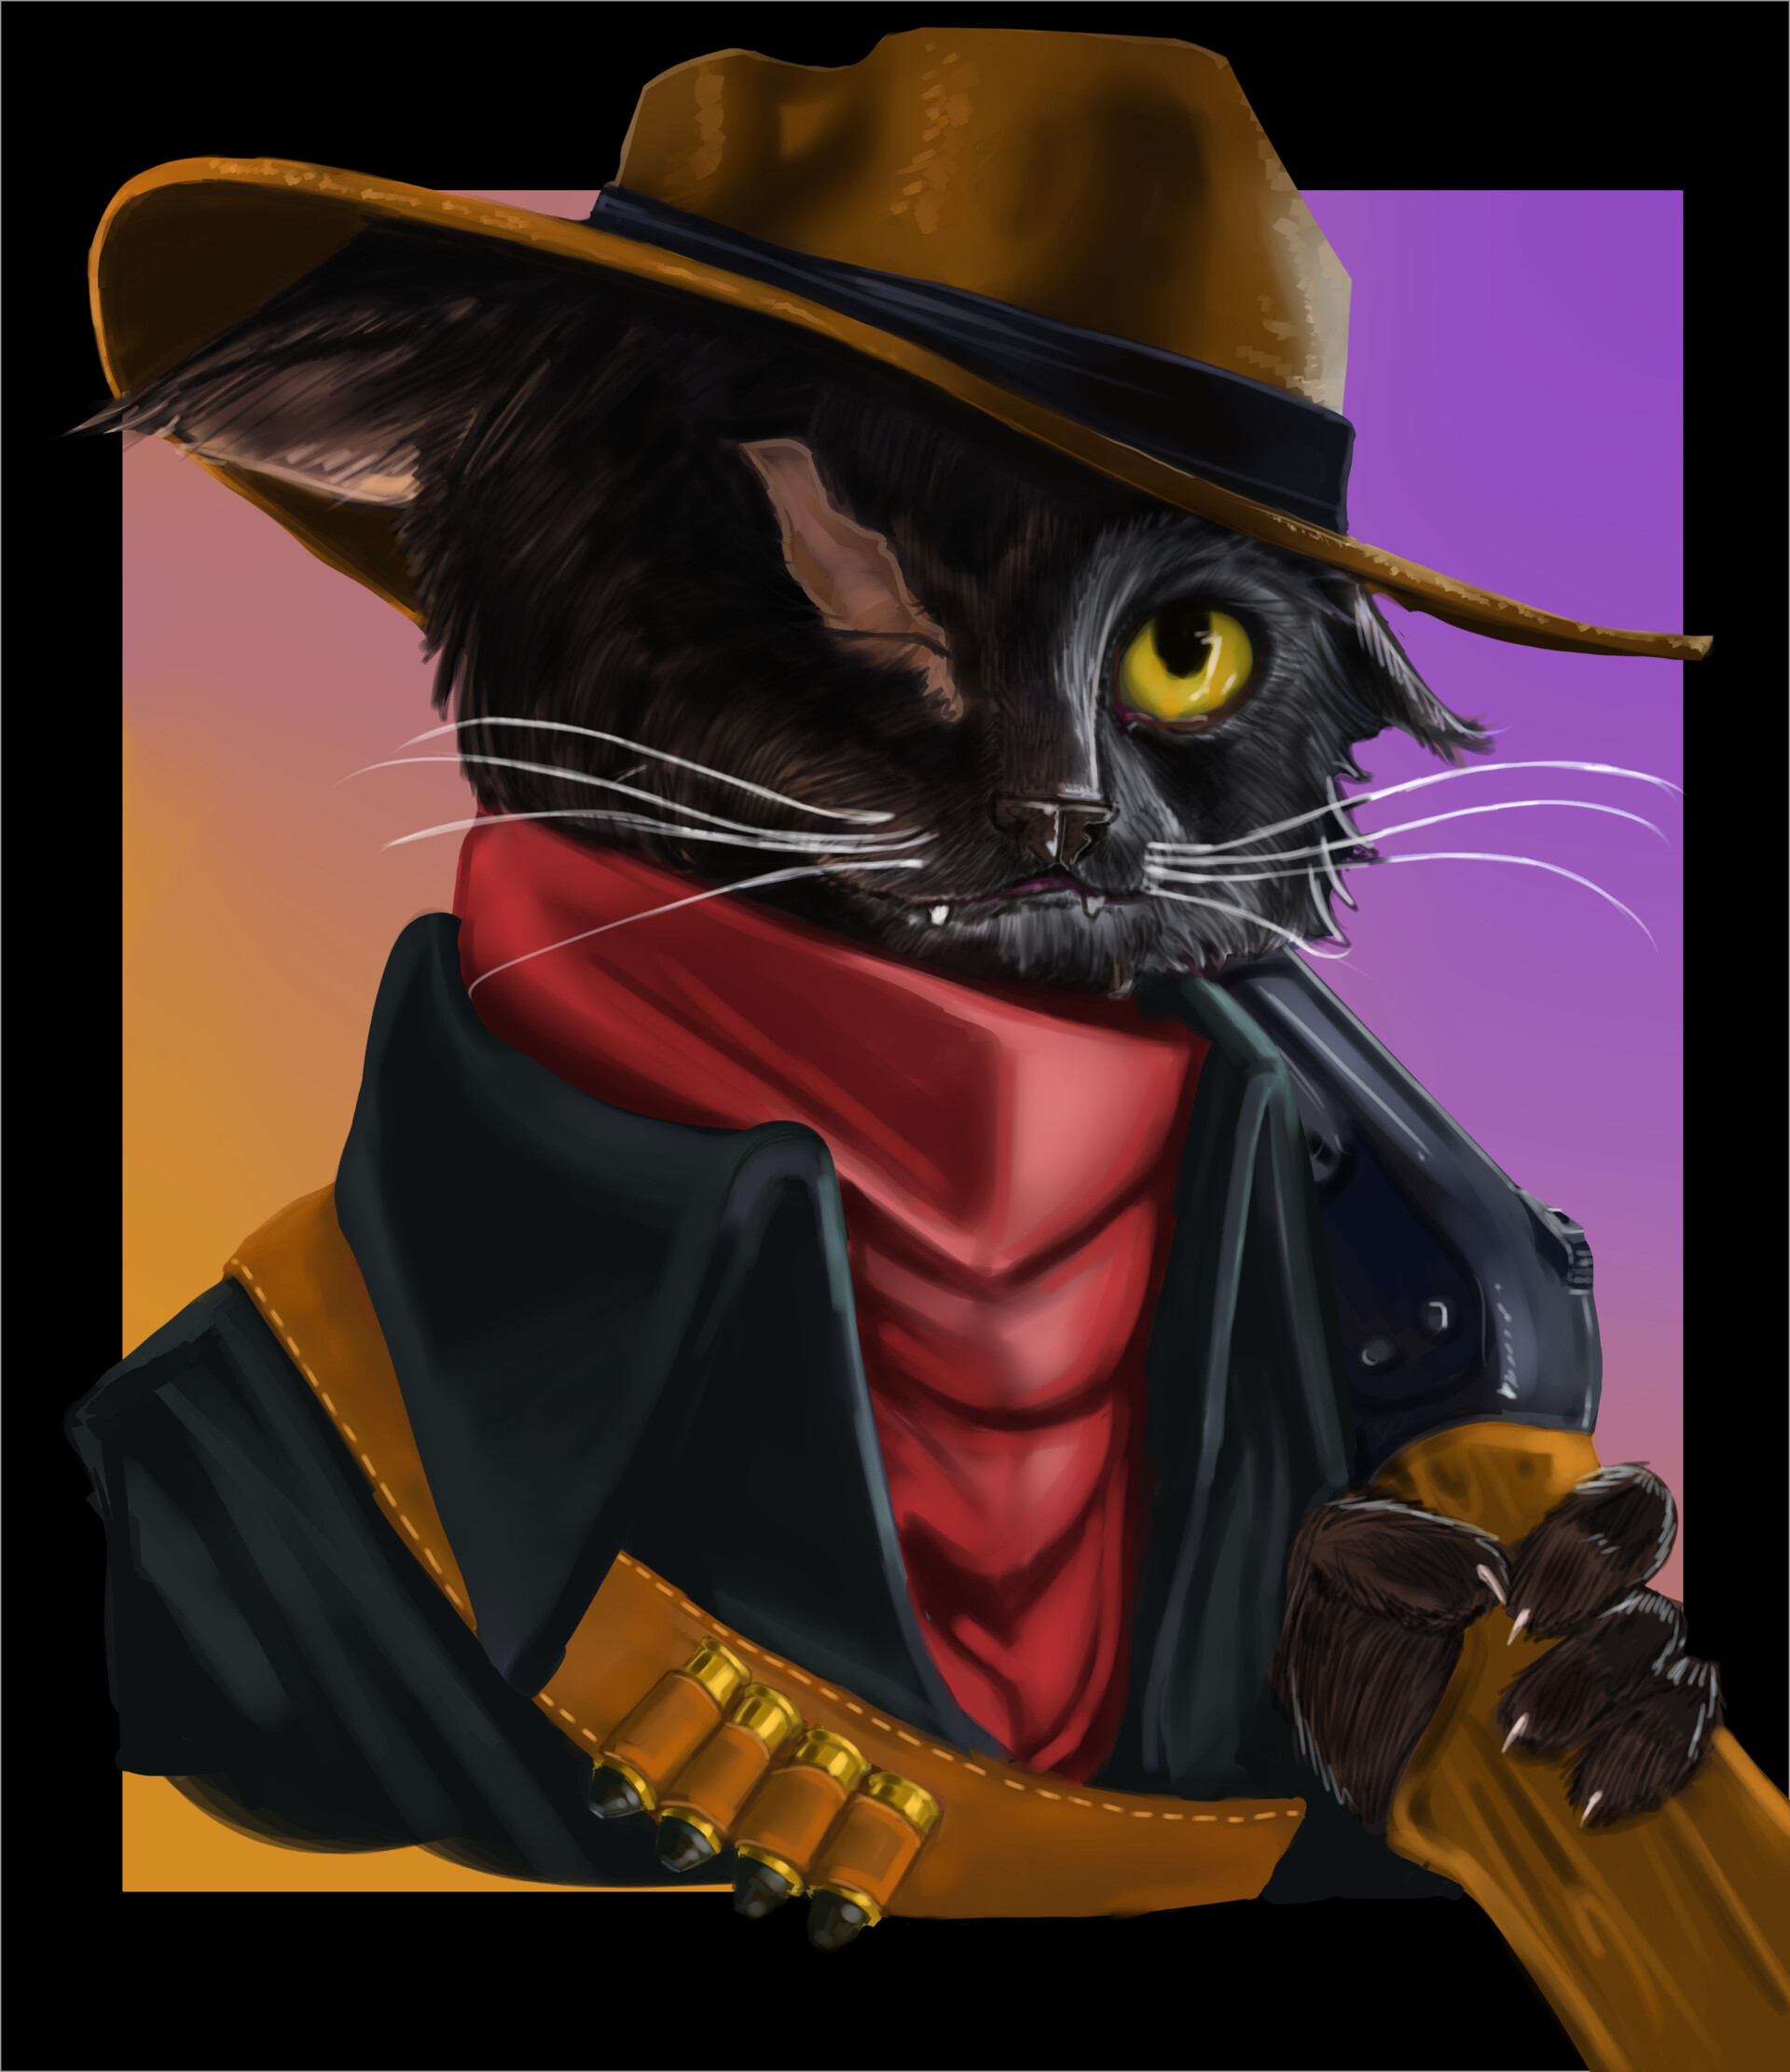 ArtStation - Matching cats profile pictures